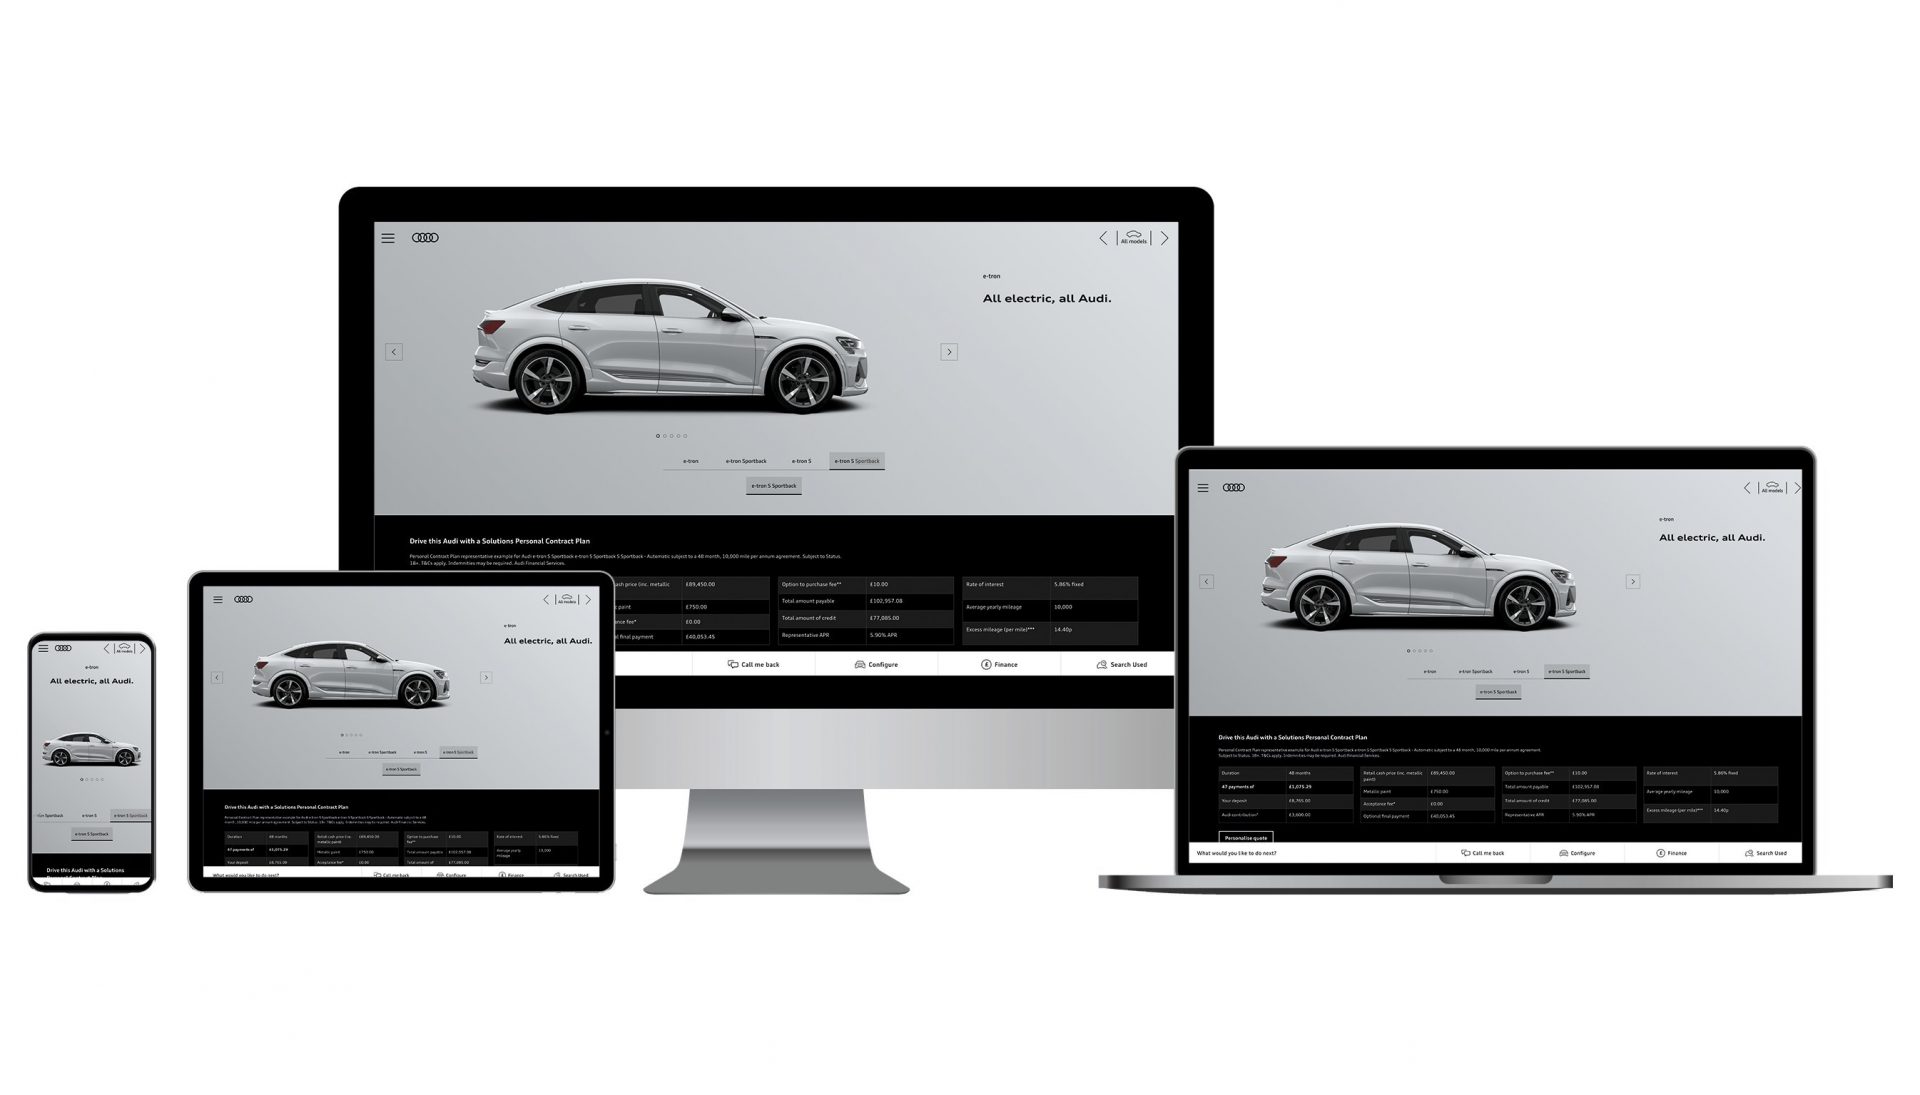 IBM and Audi UK collaborated to redesign Audi's website to deliver a more engaging digital customer experience. online